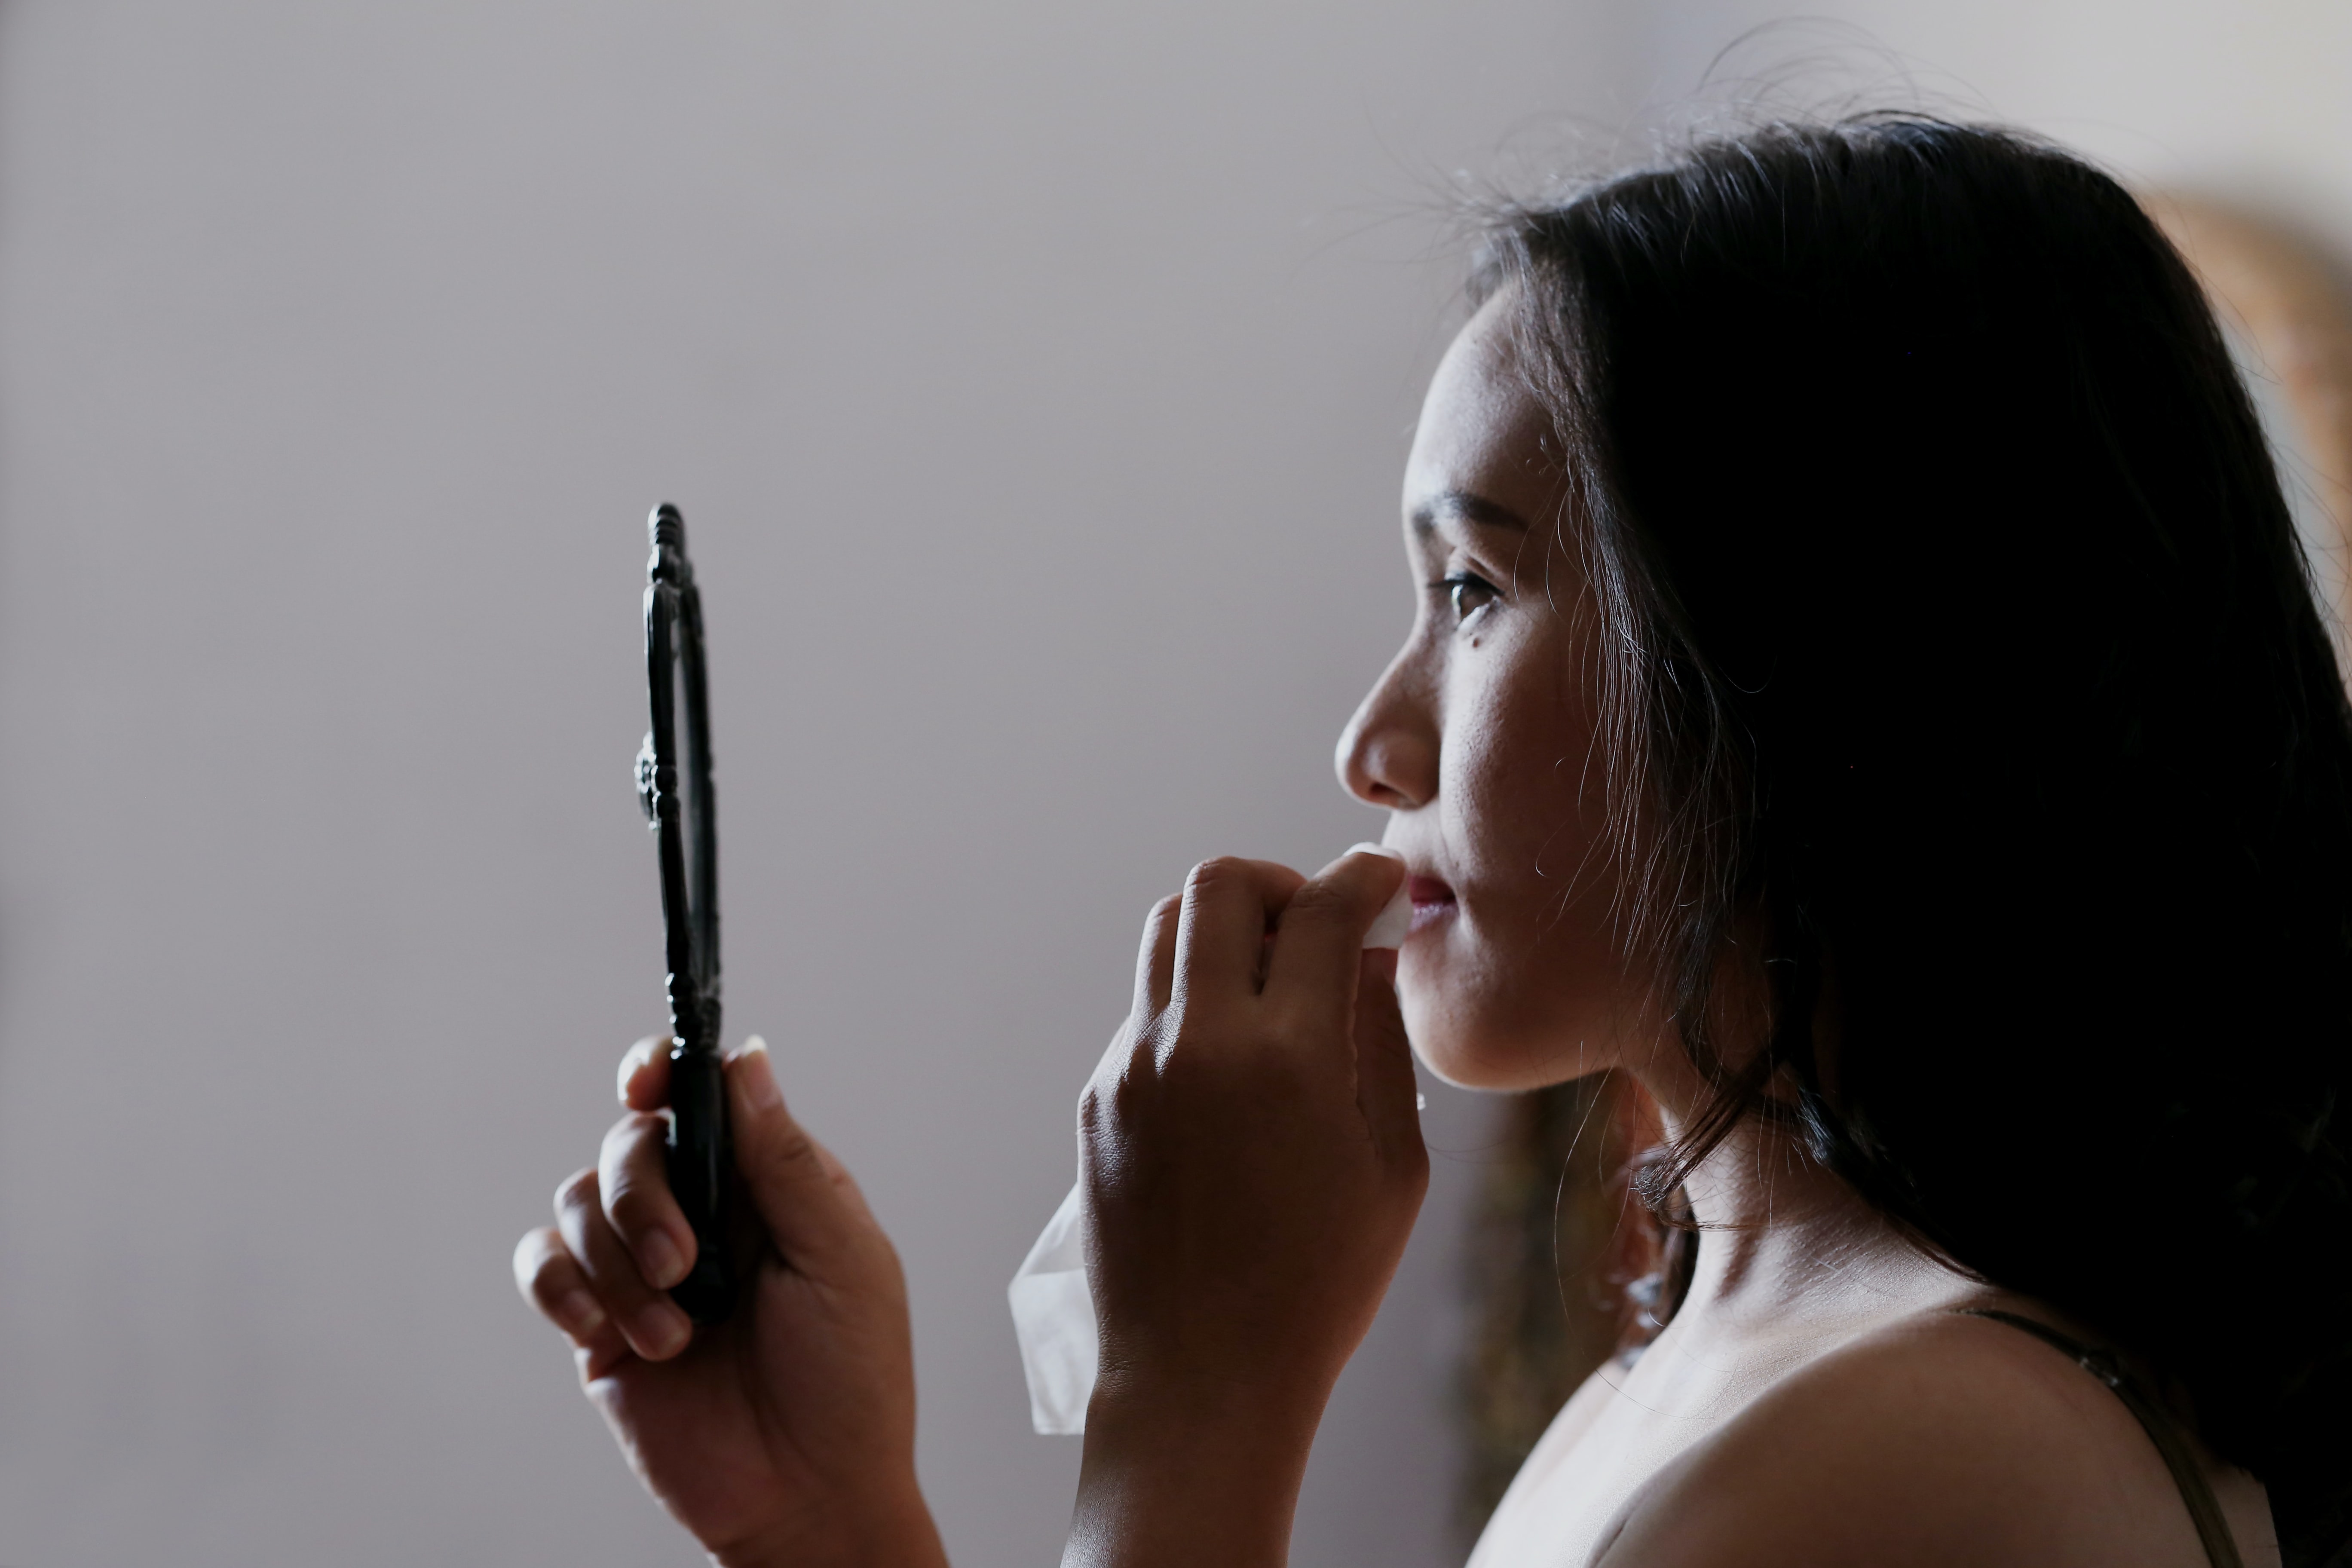 Woman taking off make-up in the mirror- body image mindset